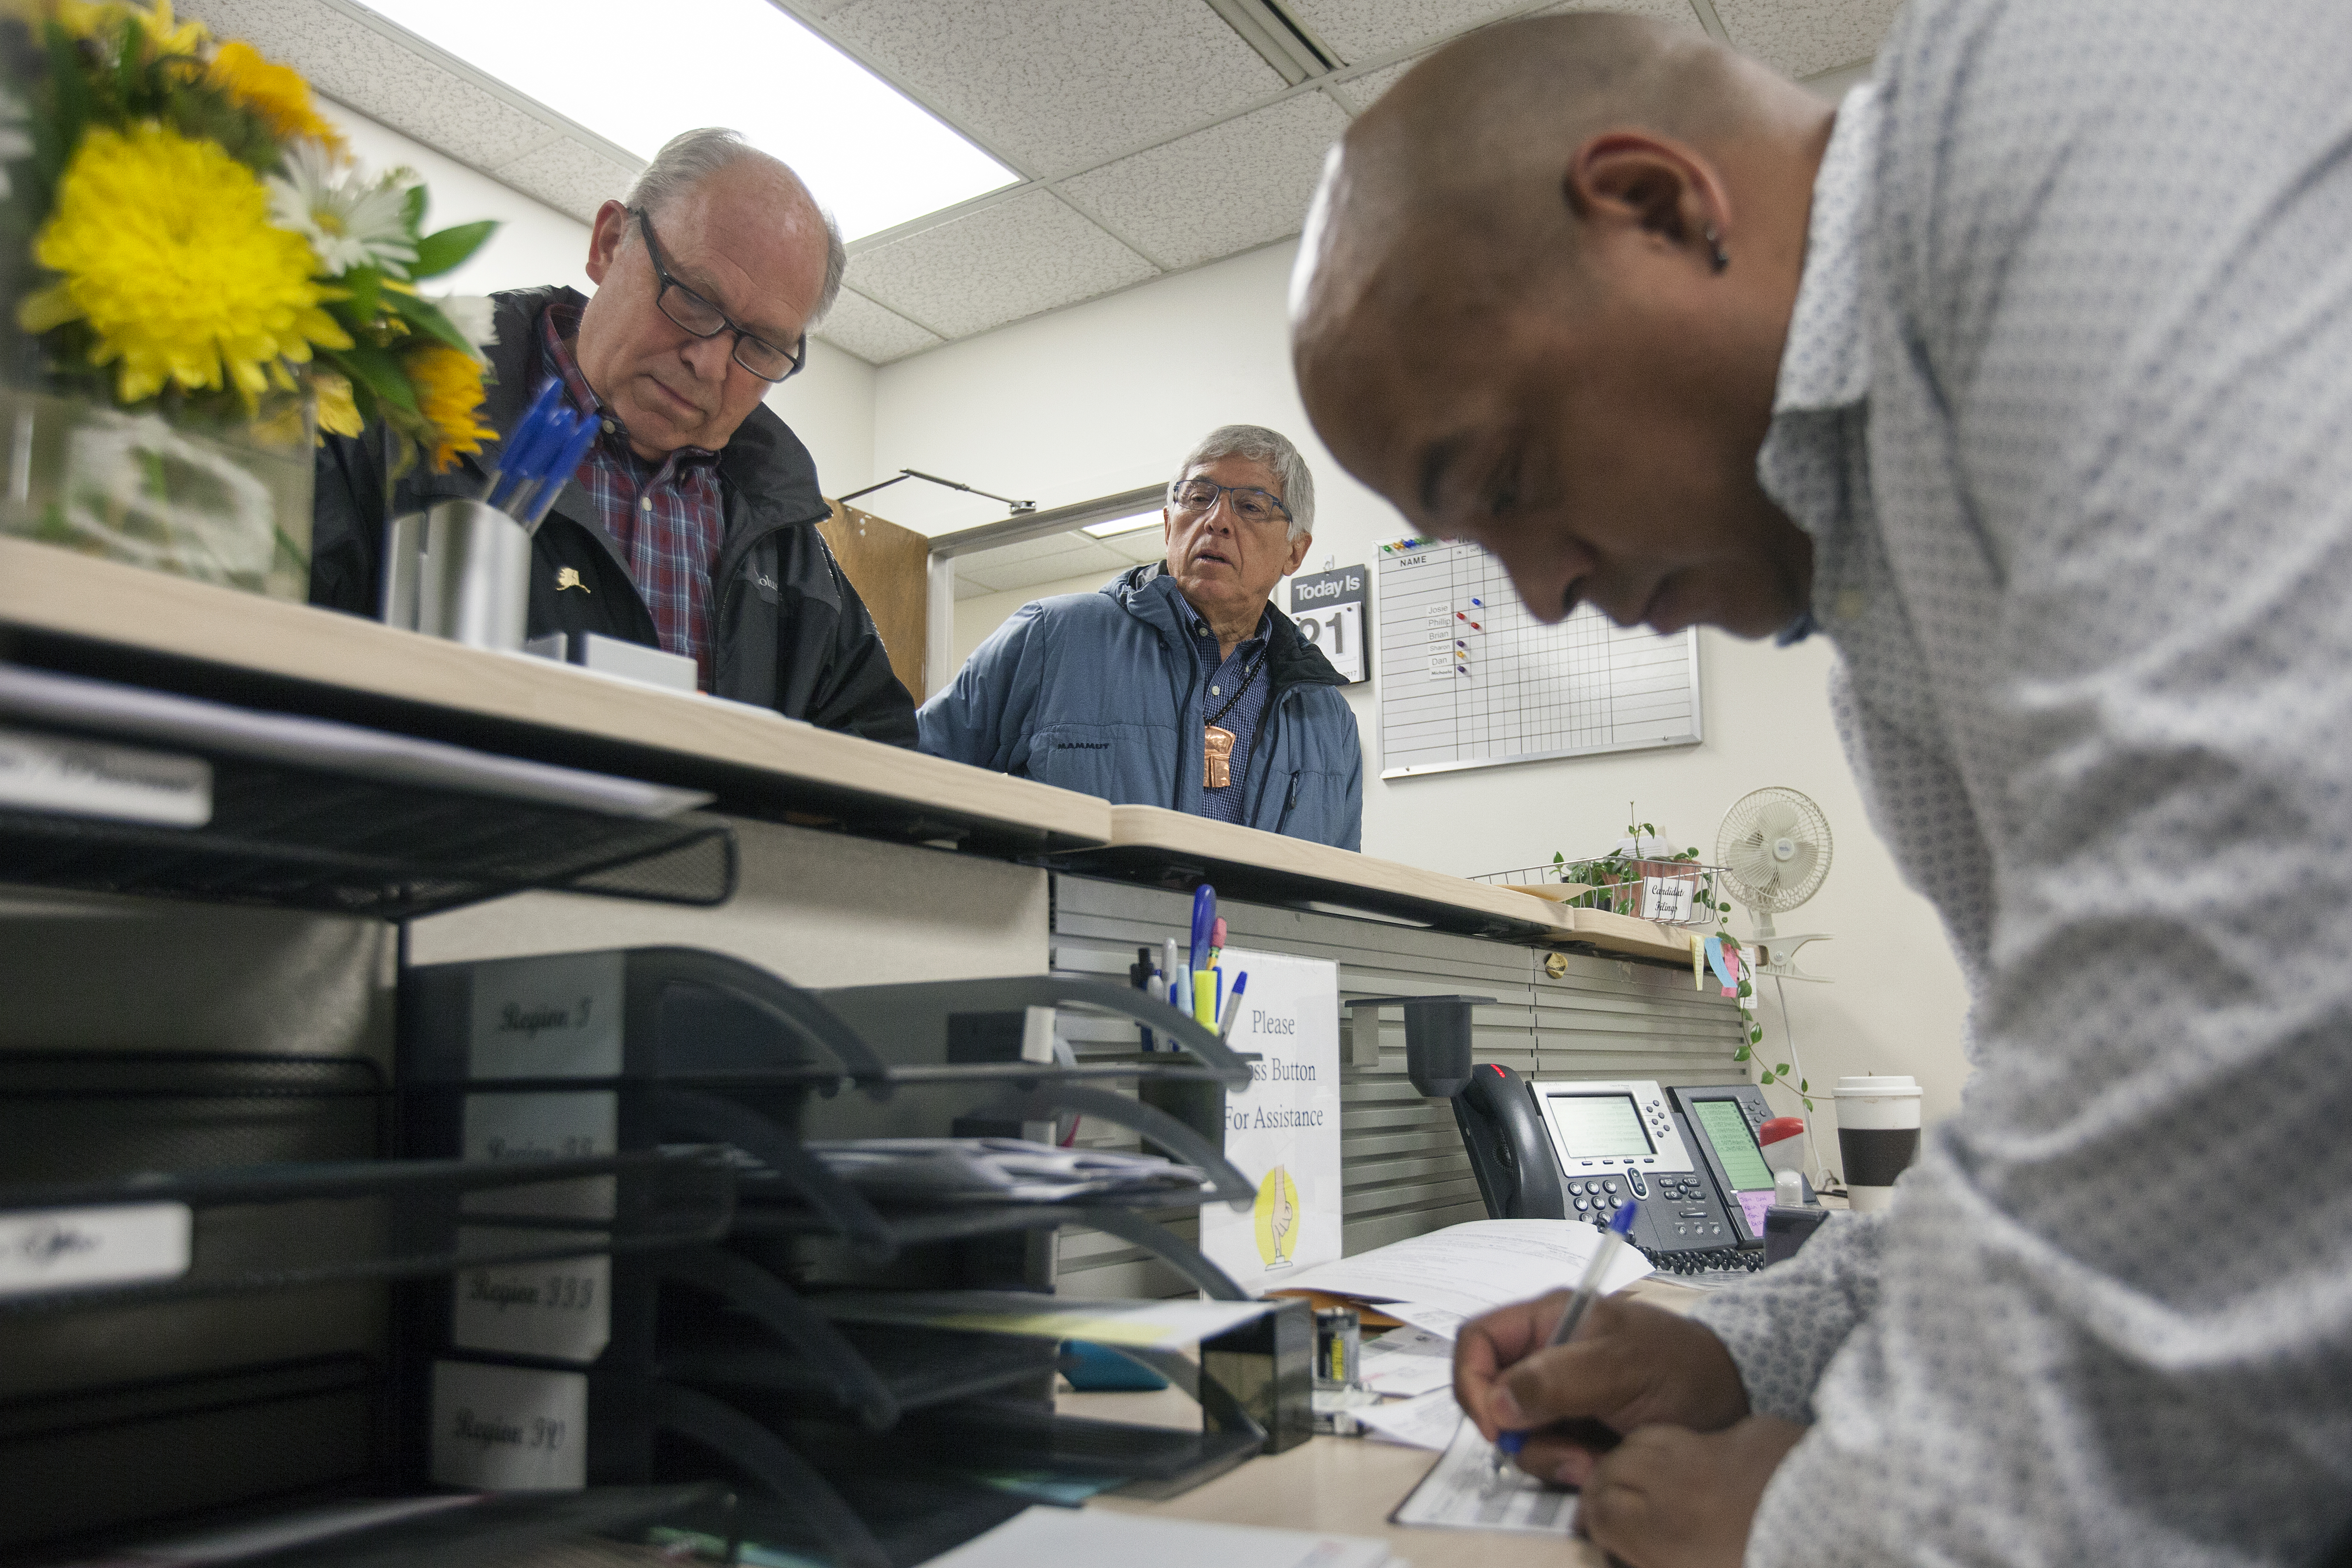 Alaska Gov. Bill Walker and Lt. Gov. Byron Mallott file for re-election with Daniel Ruiz, an administrative assistant with the Division of Elections, on Monday, August 21, 2017, in Juneau, Alaska. The two are filing as unaffiliated candidates -- though Mallott maintains his personal affiliation with the Democratic party. (Photo by Rashah McChesney/Alaska's Energy Desk)